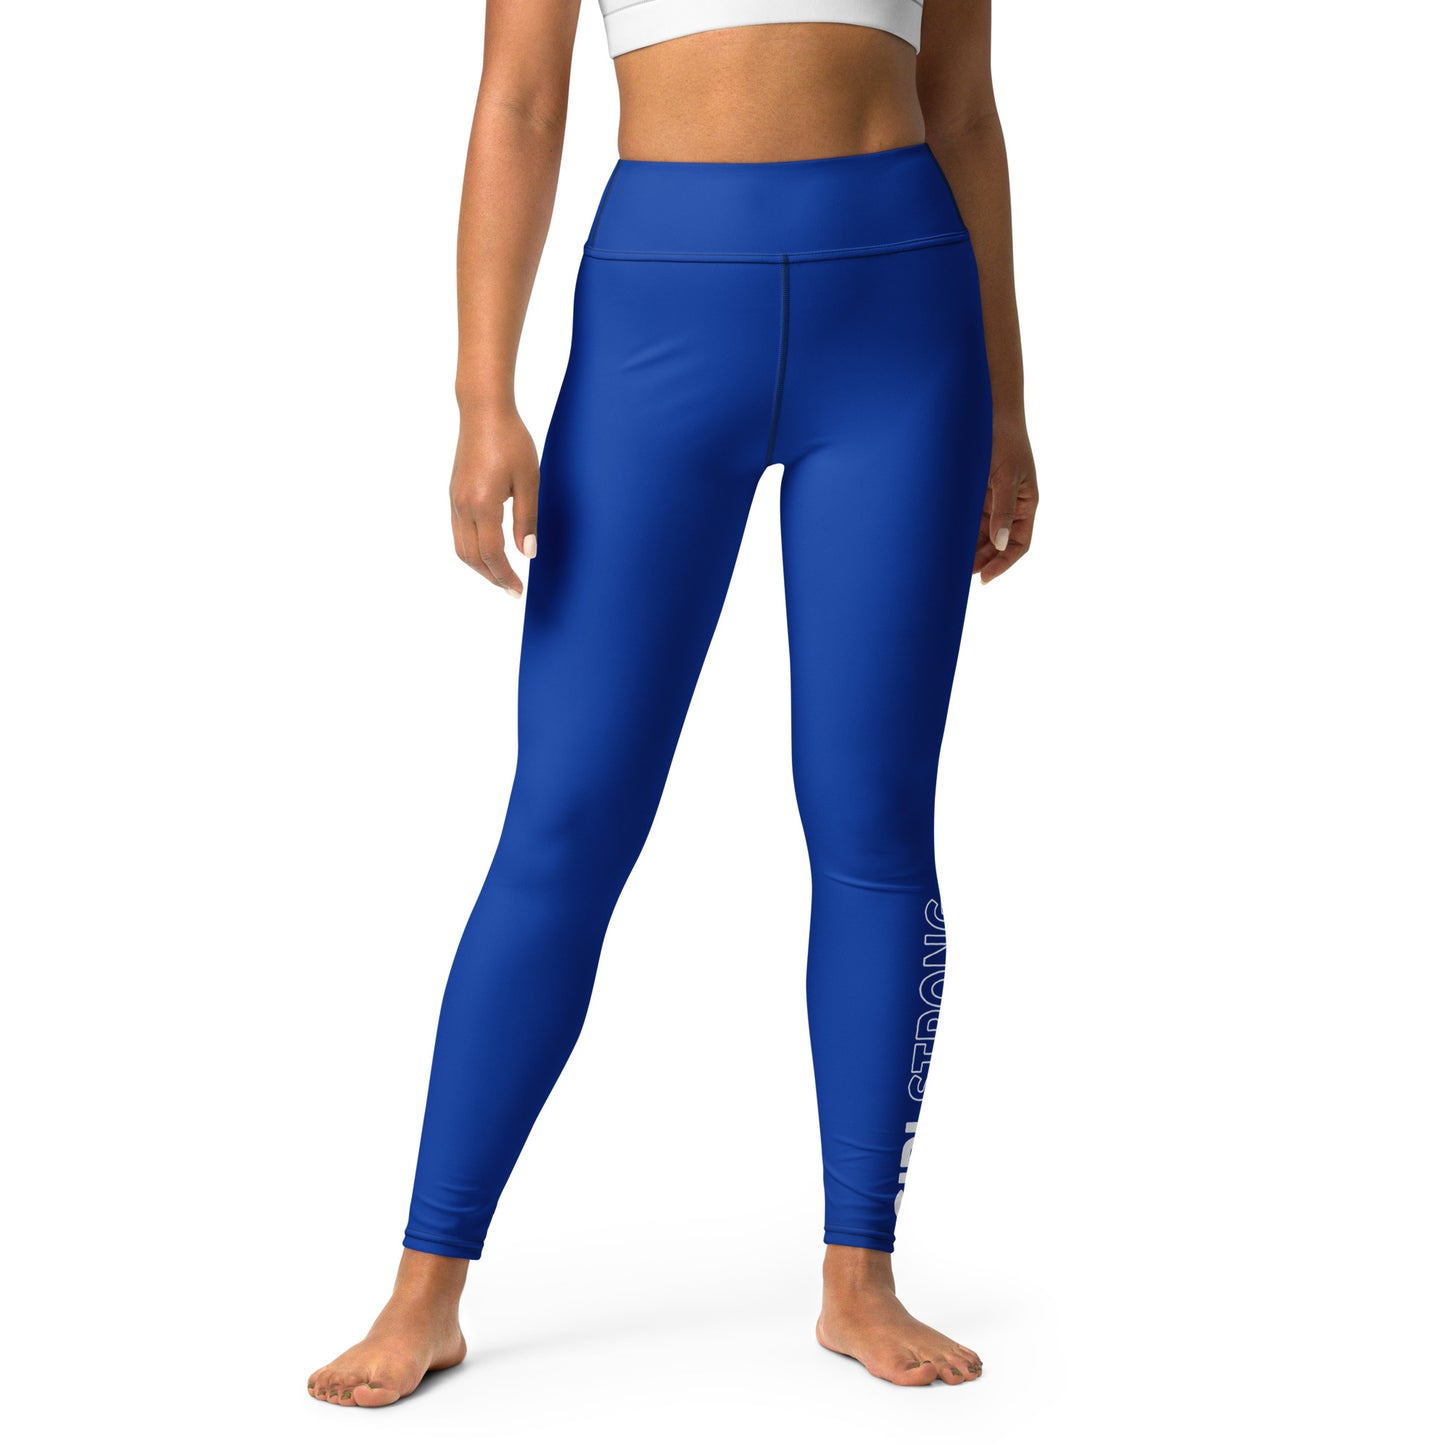 ELEVATED ESSENTIALS, THE PERFECT HIGH WAISTBAND LEGGING KENTUCKY